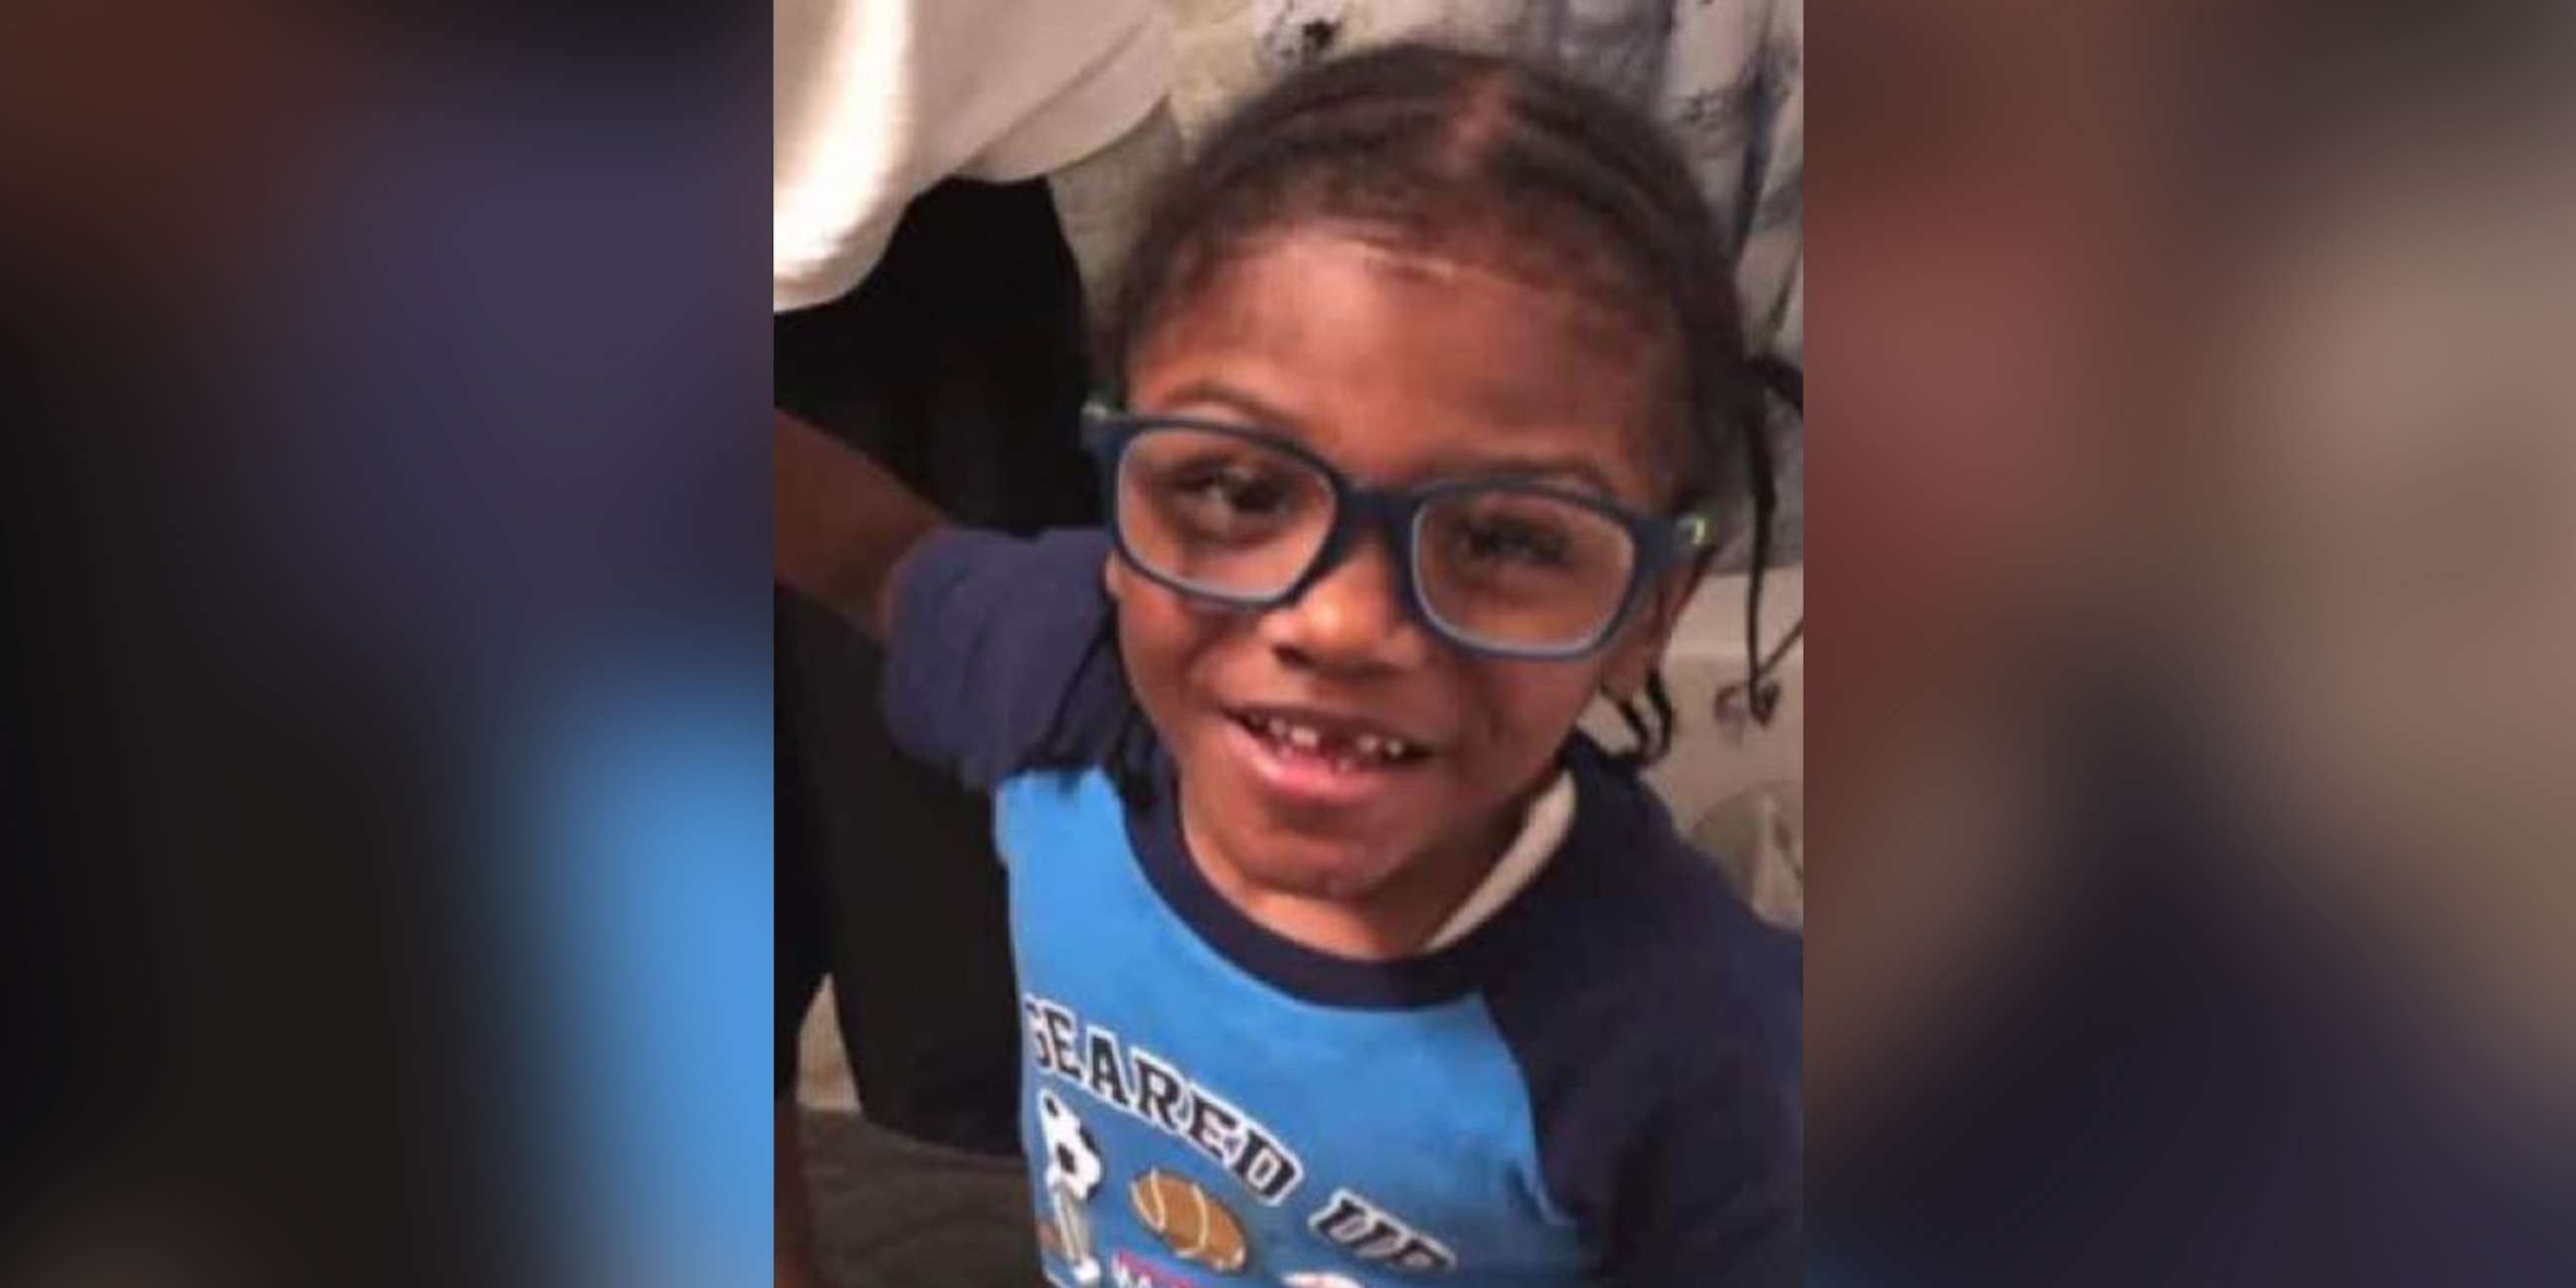 PHOTO: Malachi Lawson, 4, of Baltimore, was found dead in a dumpster on Aug. 3, 2019.